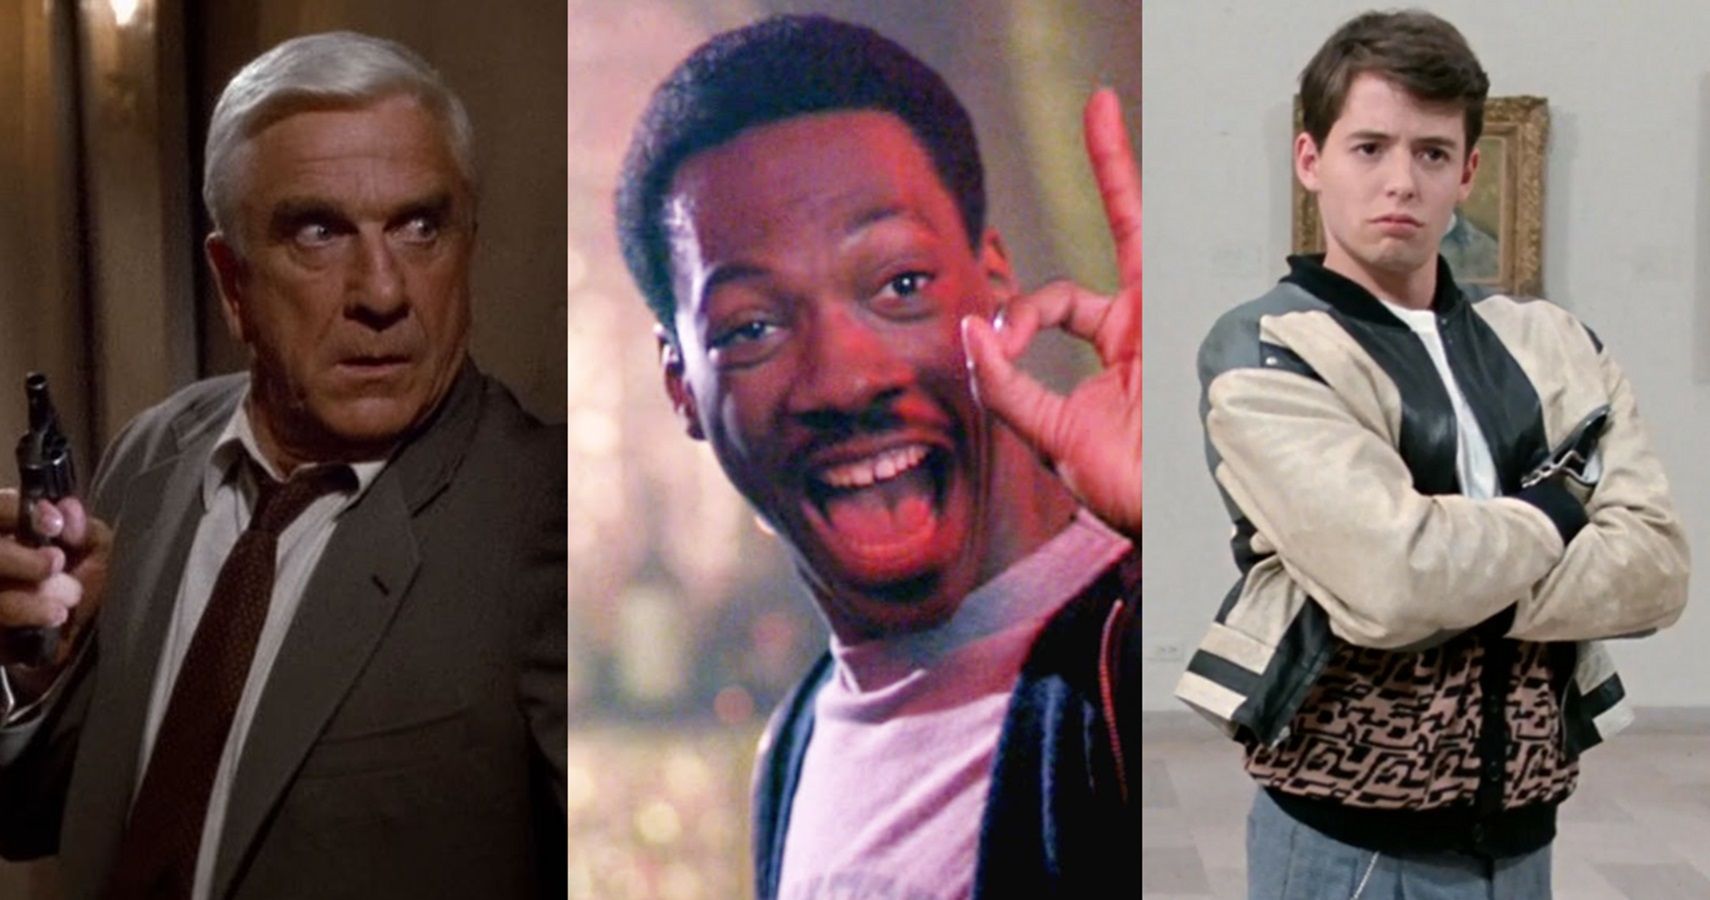 The 10 Best Movie Performances From The '80s | ScreenRant